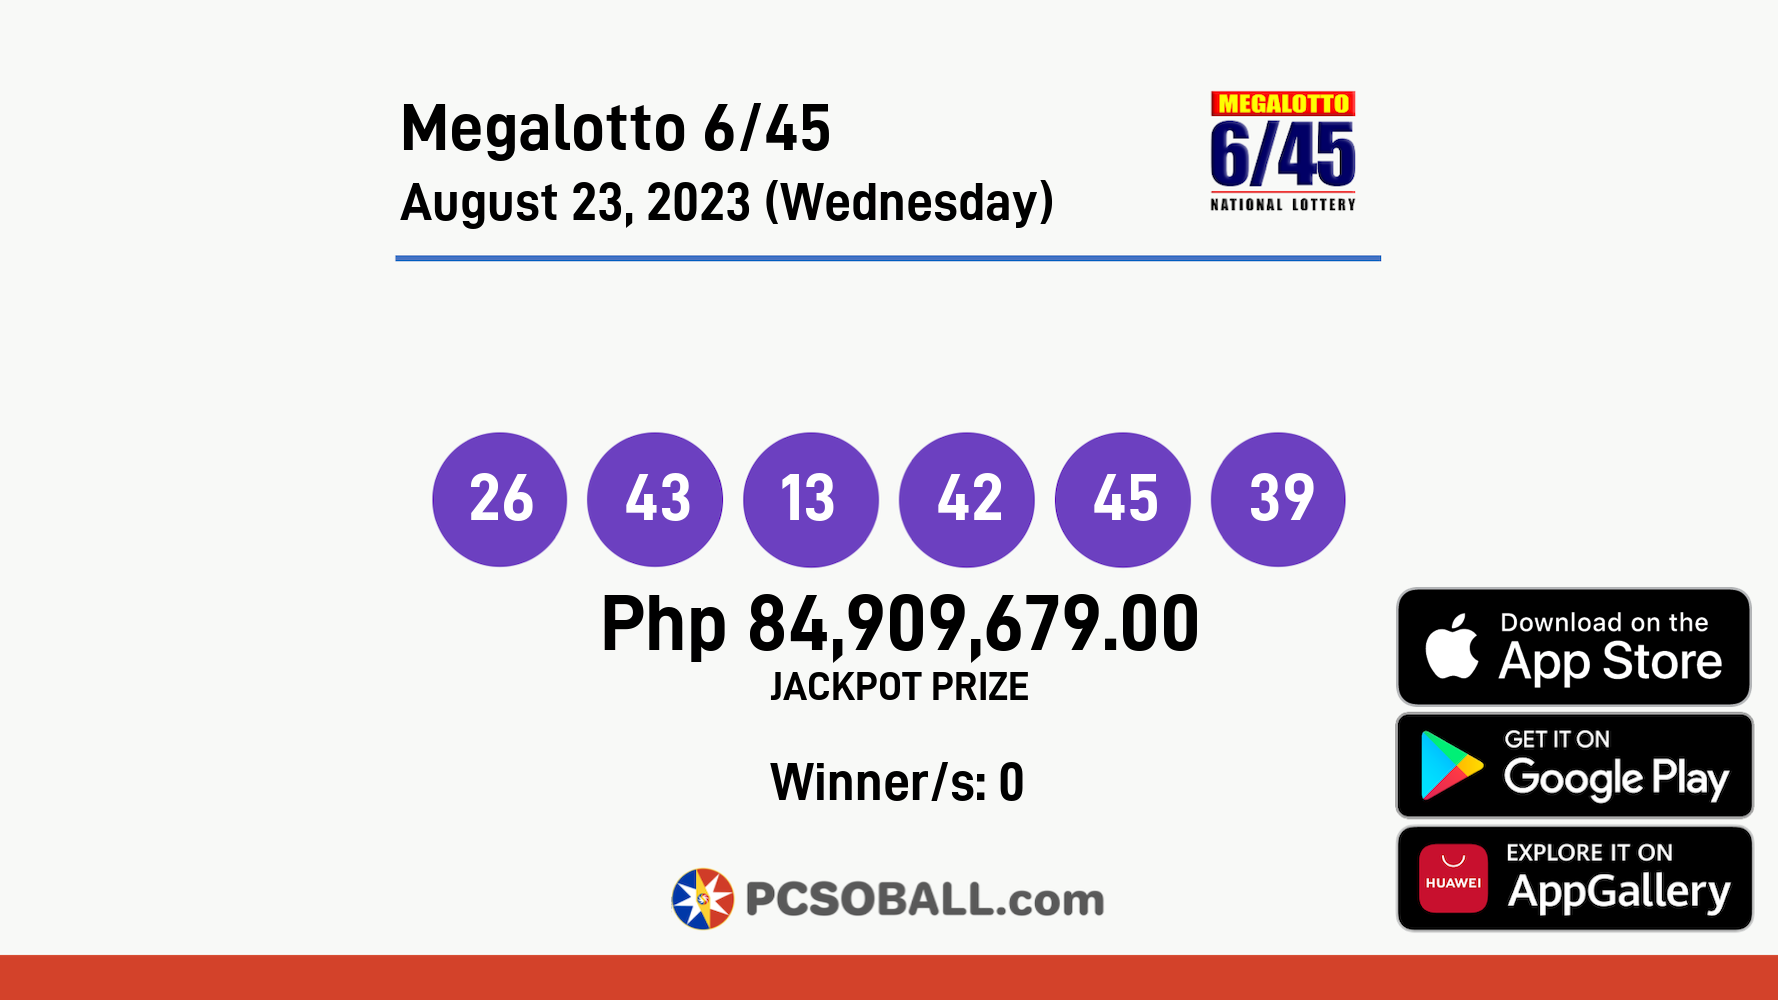 Megalotto 6/45 August 23, 2023 (Wednesday) Result